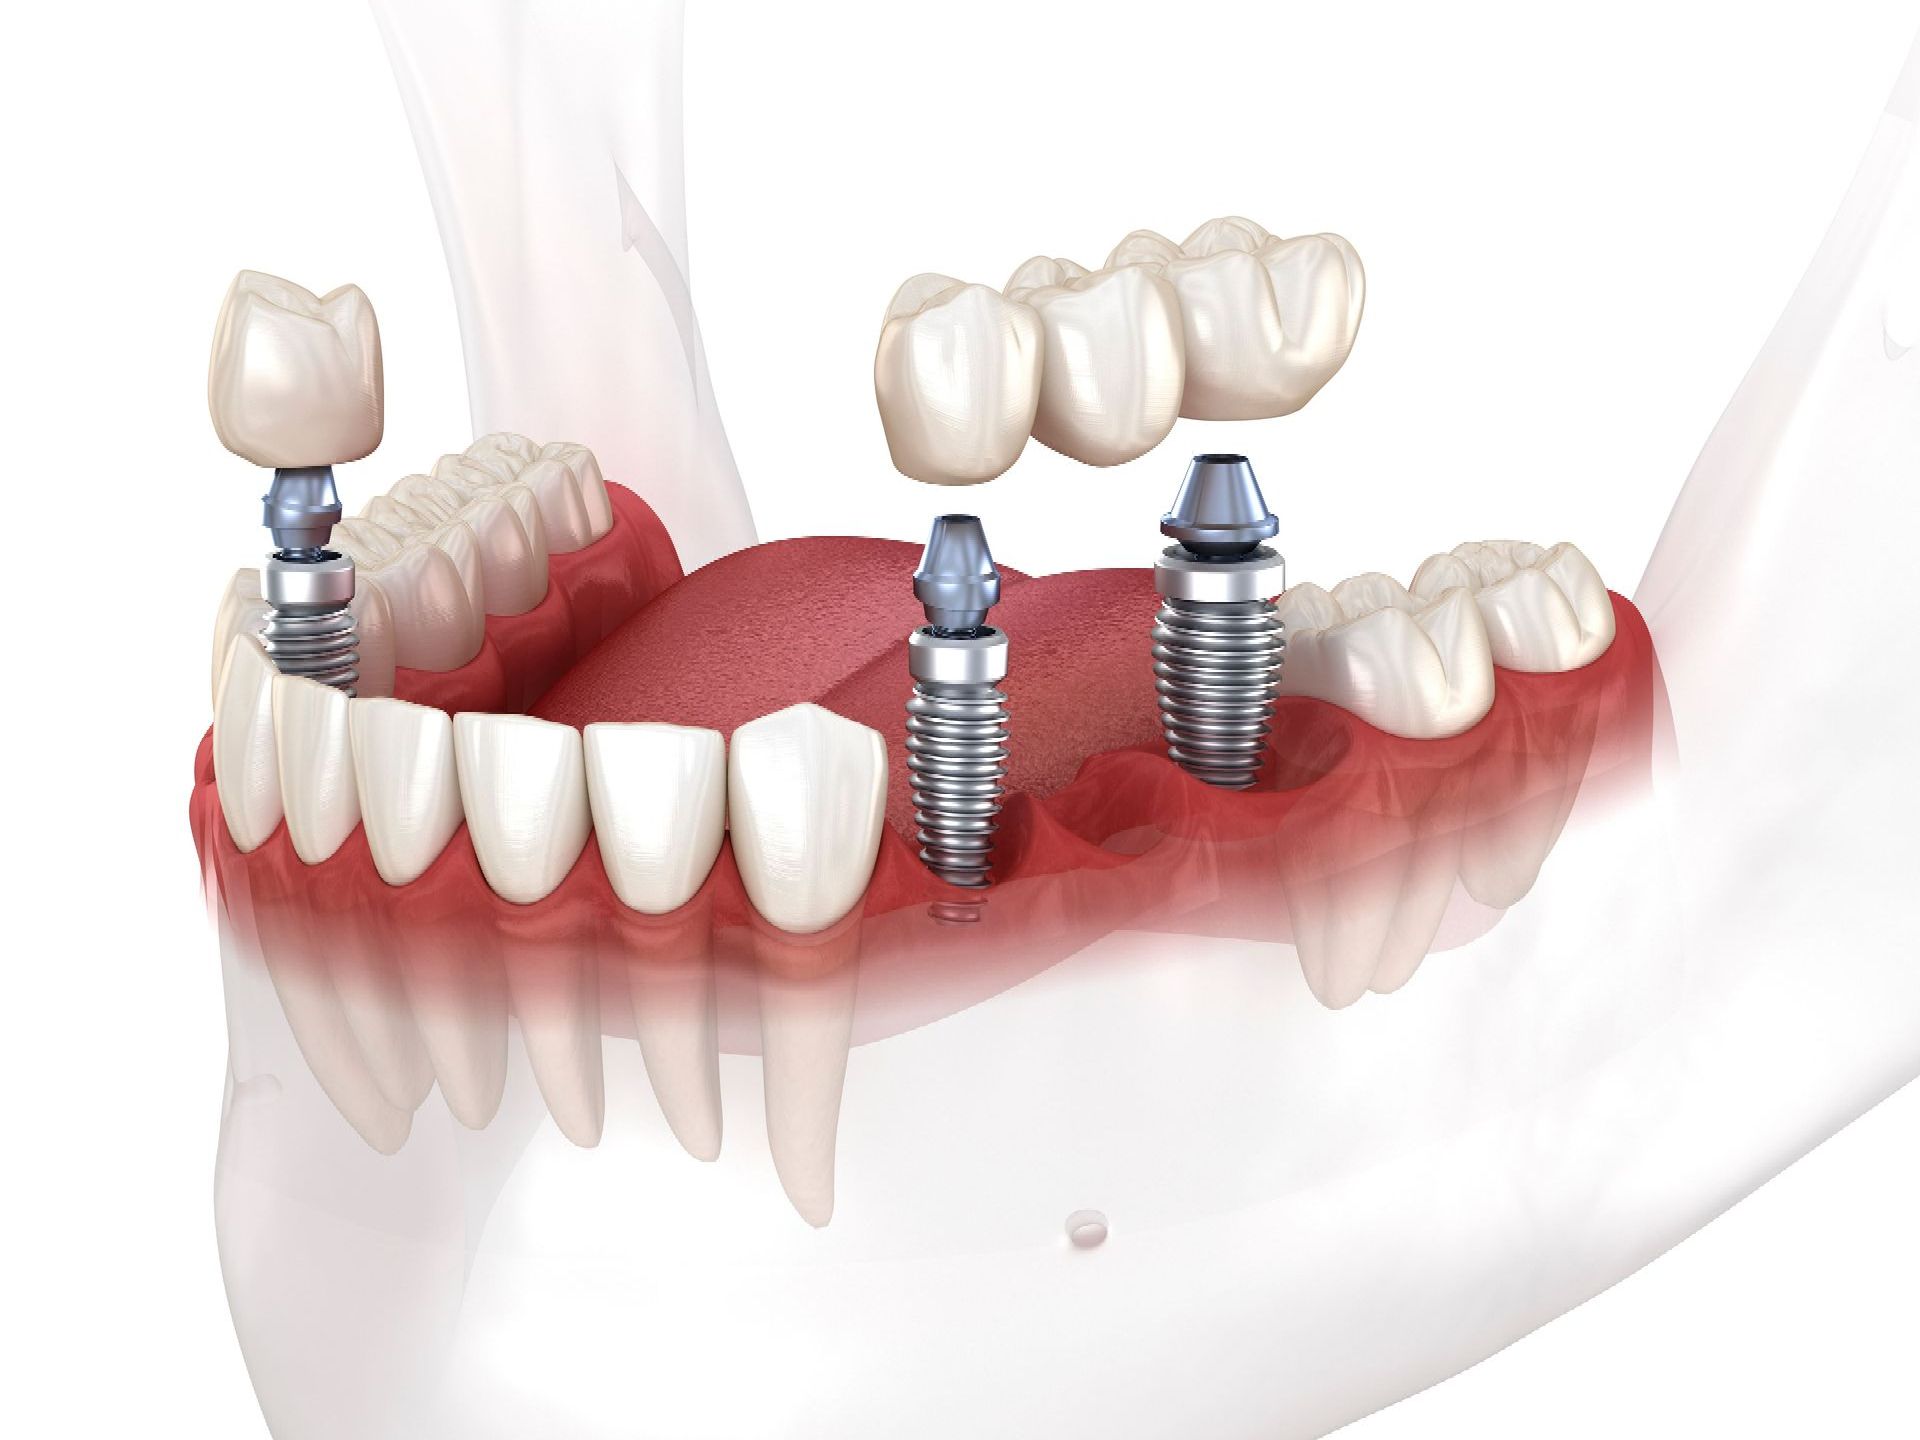 A computer generated image of multiple teeth being replaced with dental implants